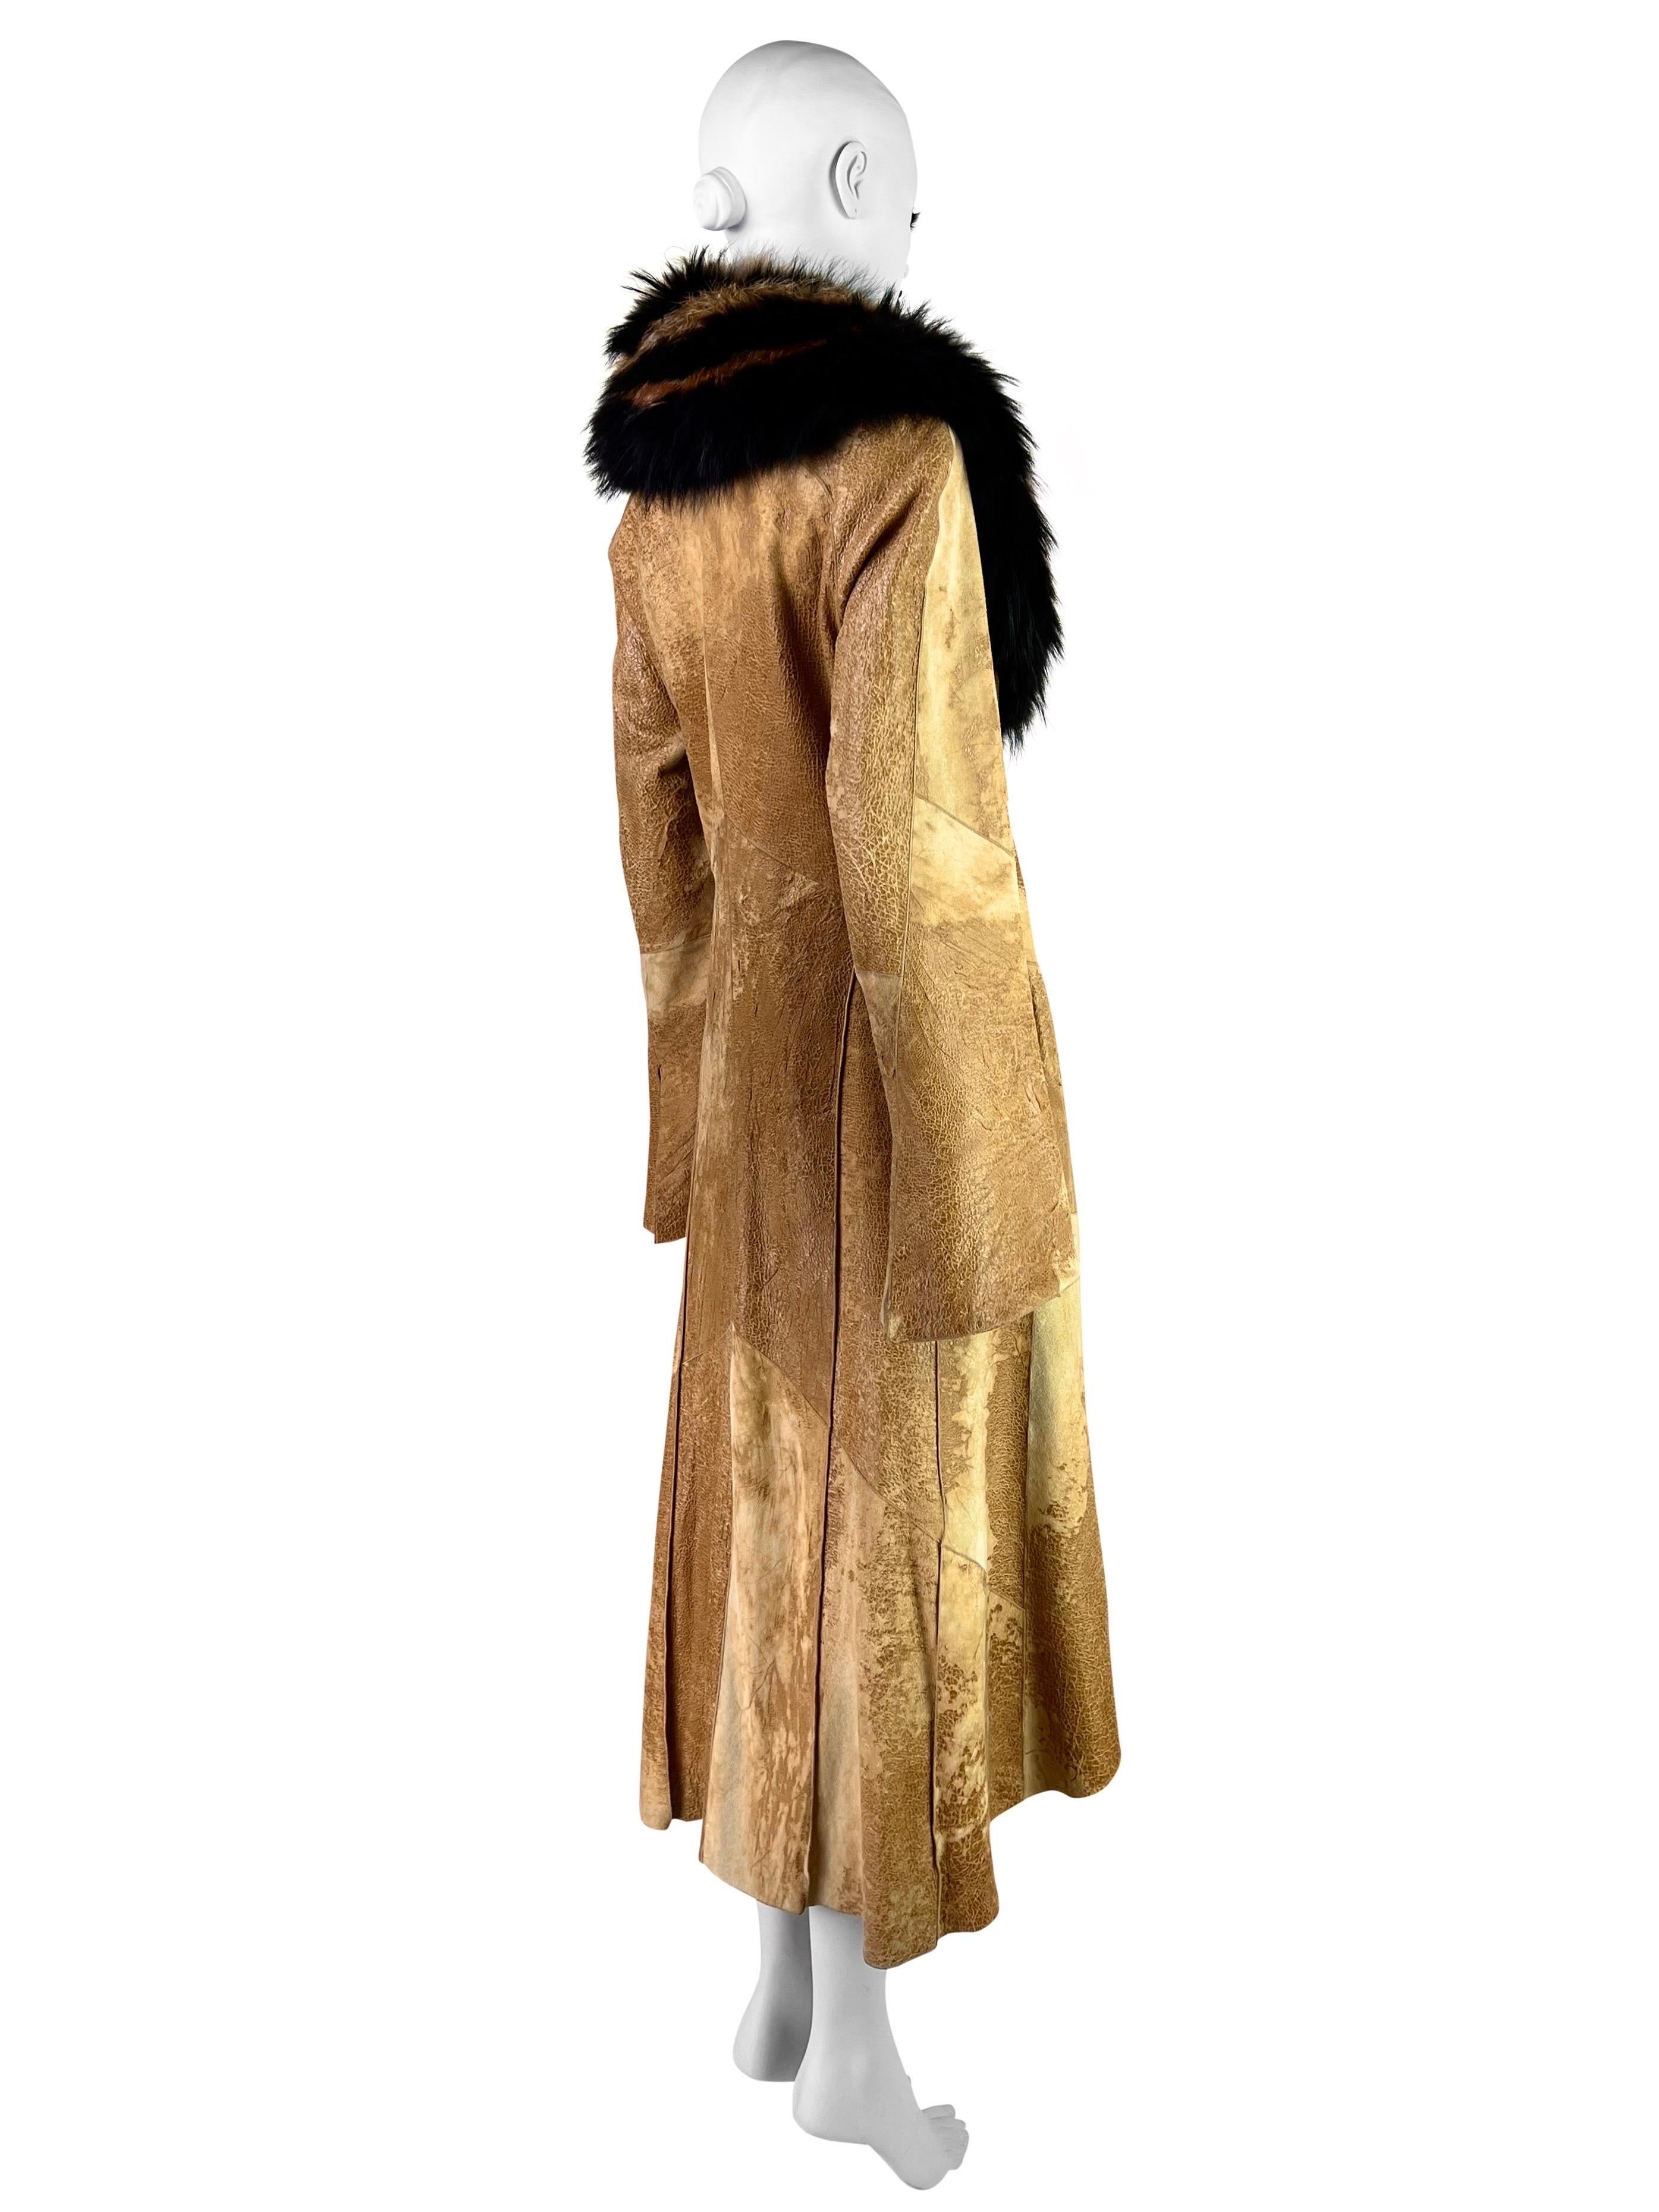 Roberto Cavalli Fall 2002 Leather Coat with Fox Fur For Sale 1